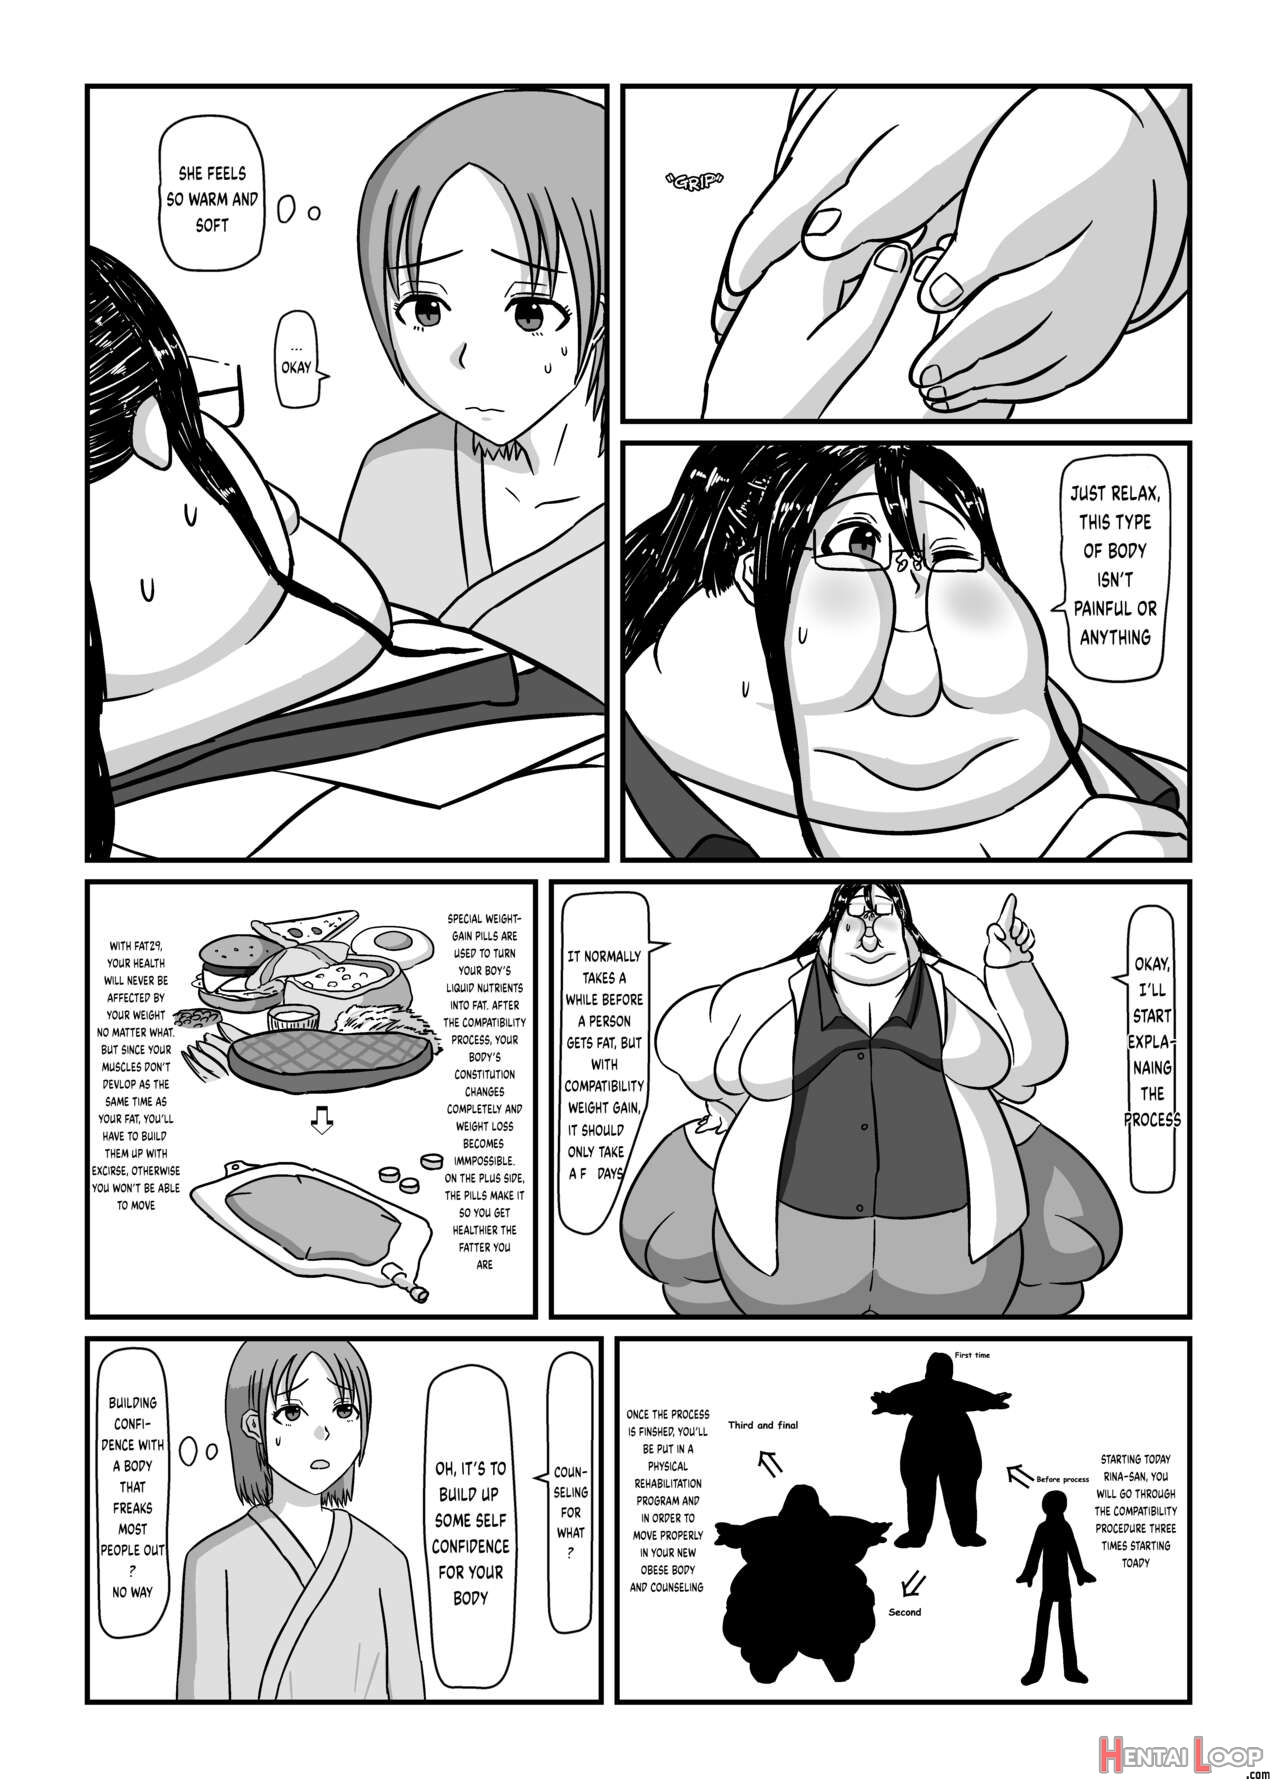 Compatibility Weight Gain - English page 7